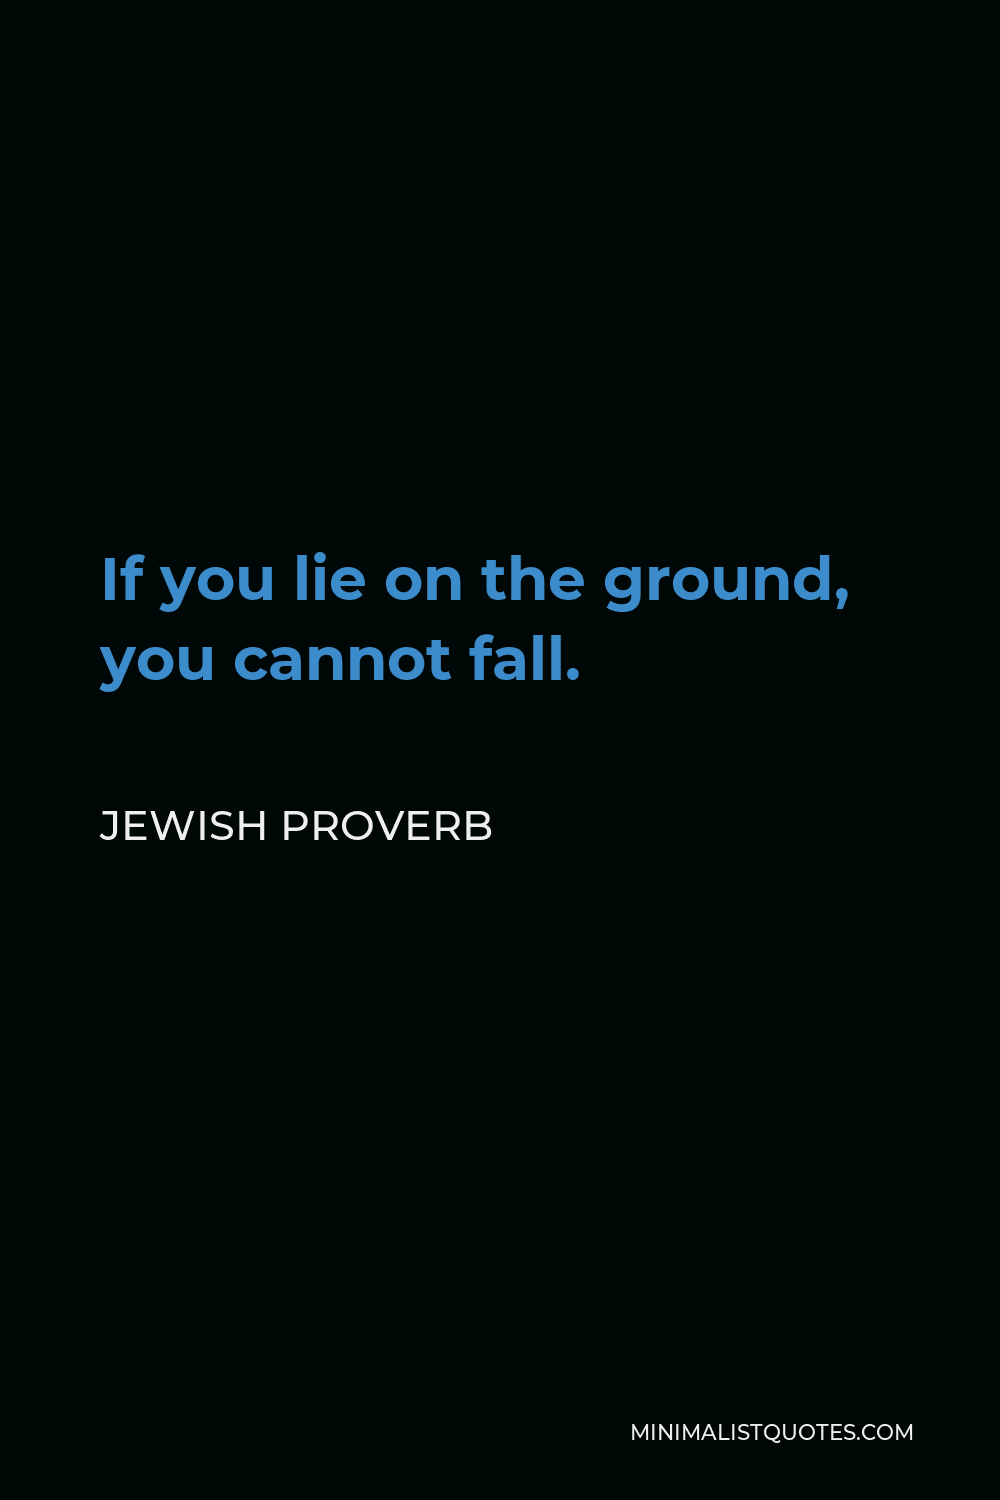 Jewish Proverb Quote - If you lie on the ground, you cannot fall.